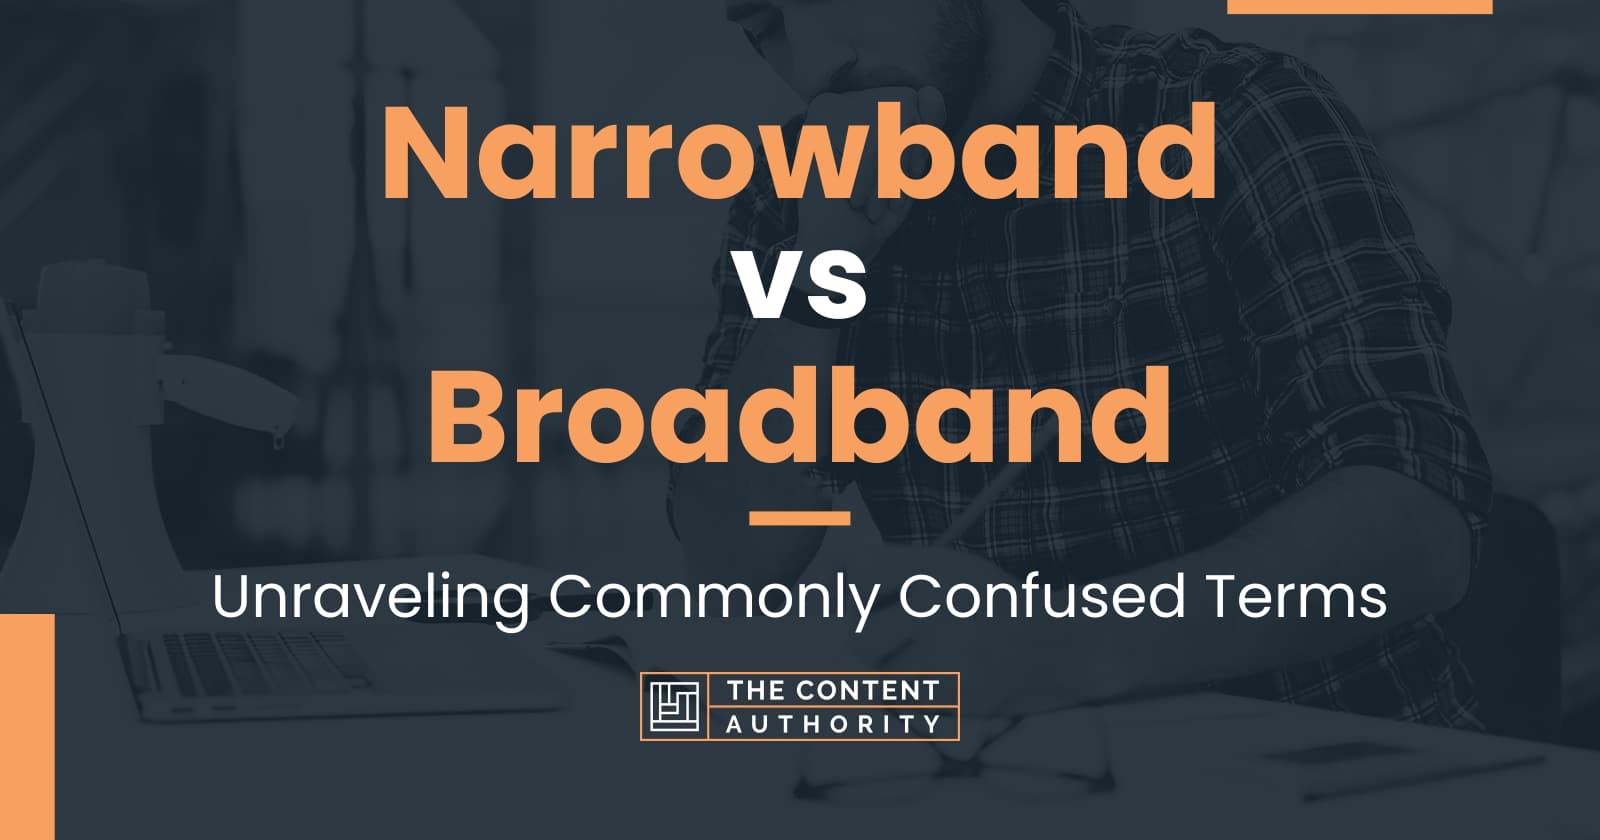 Narrowband vs Broadband: Unraveling Commonly Confused Terms